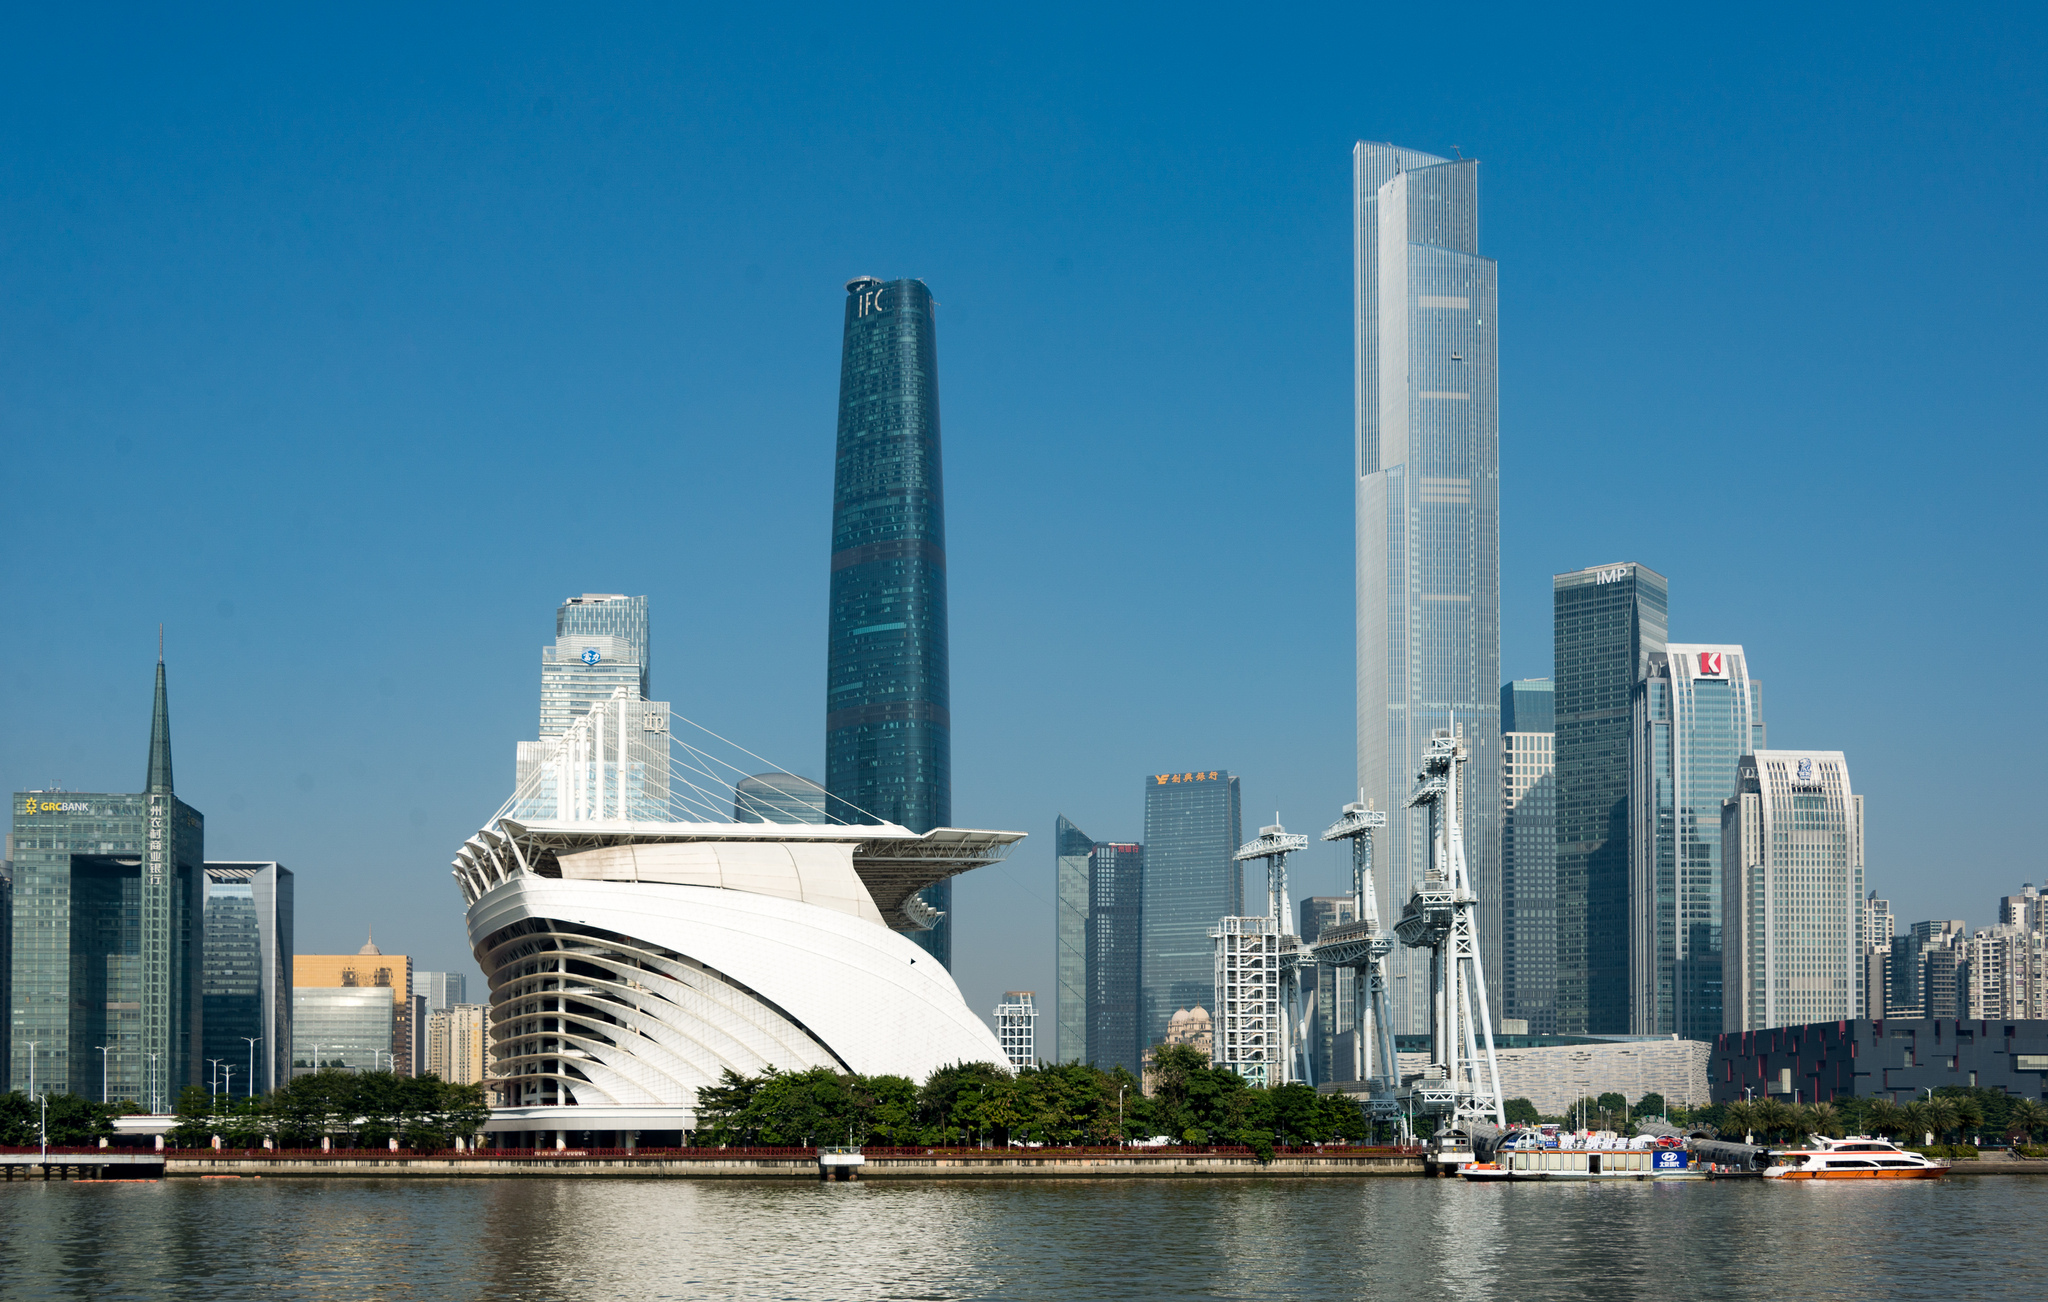 <p>To reduce its carbon emissions, Guangzhou aims to become a world-class environmental city by 2050 (Image: xiquinhosilva)</p>